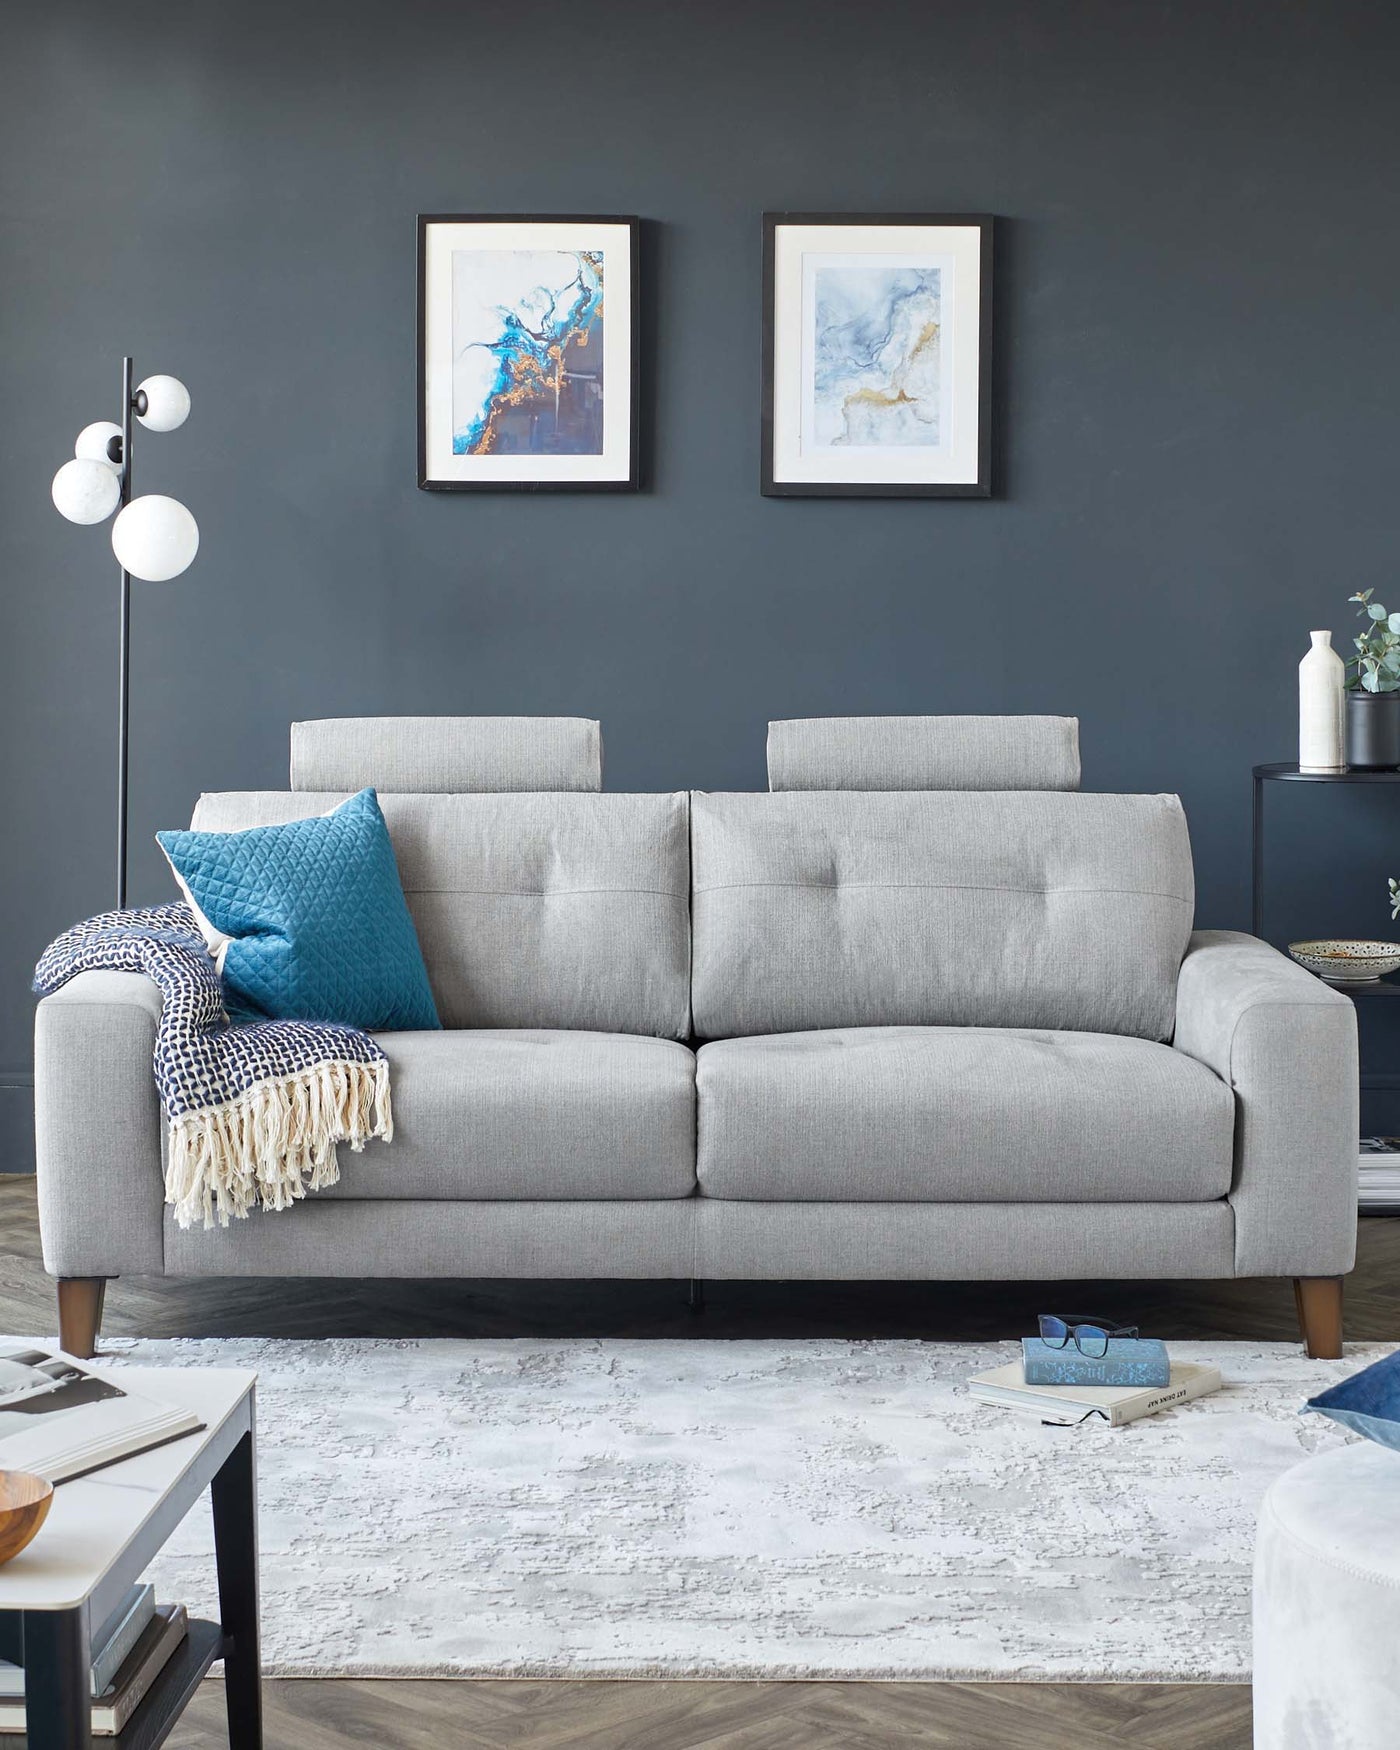 Modern light grey fabric three-seater sofa with cylindrical wooden legs, accented with a patterned throw and blue pillows. A sleek black side table with a round top and a vase is placed to the right, complementing the sofa and framed abstract art hanging above.